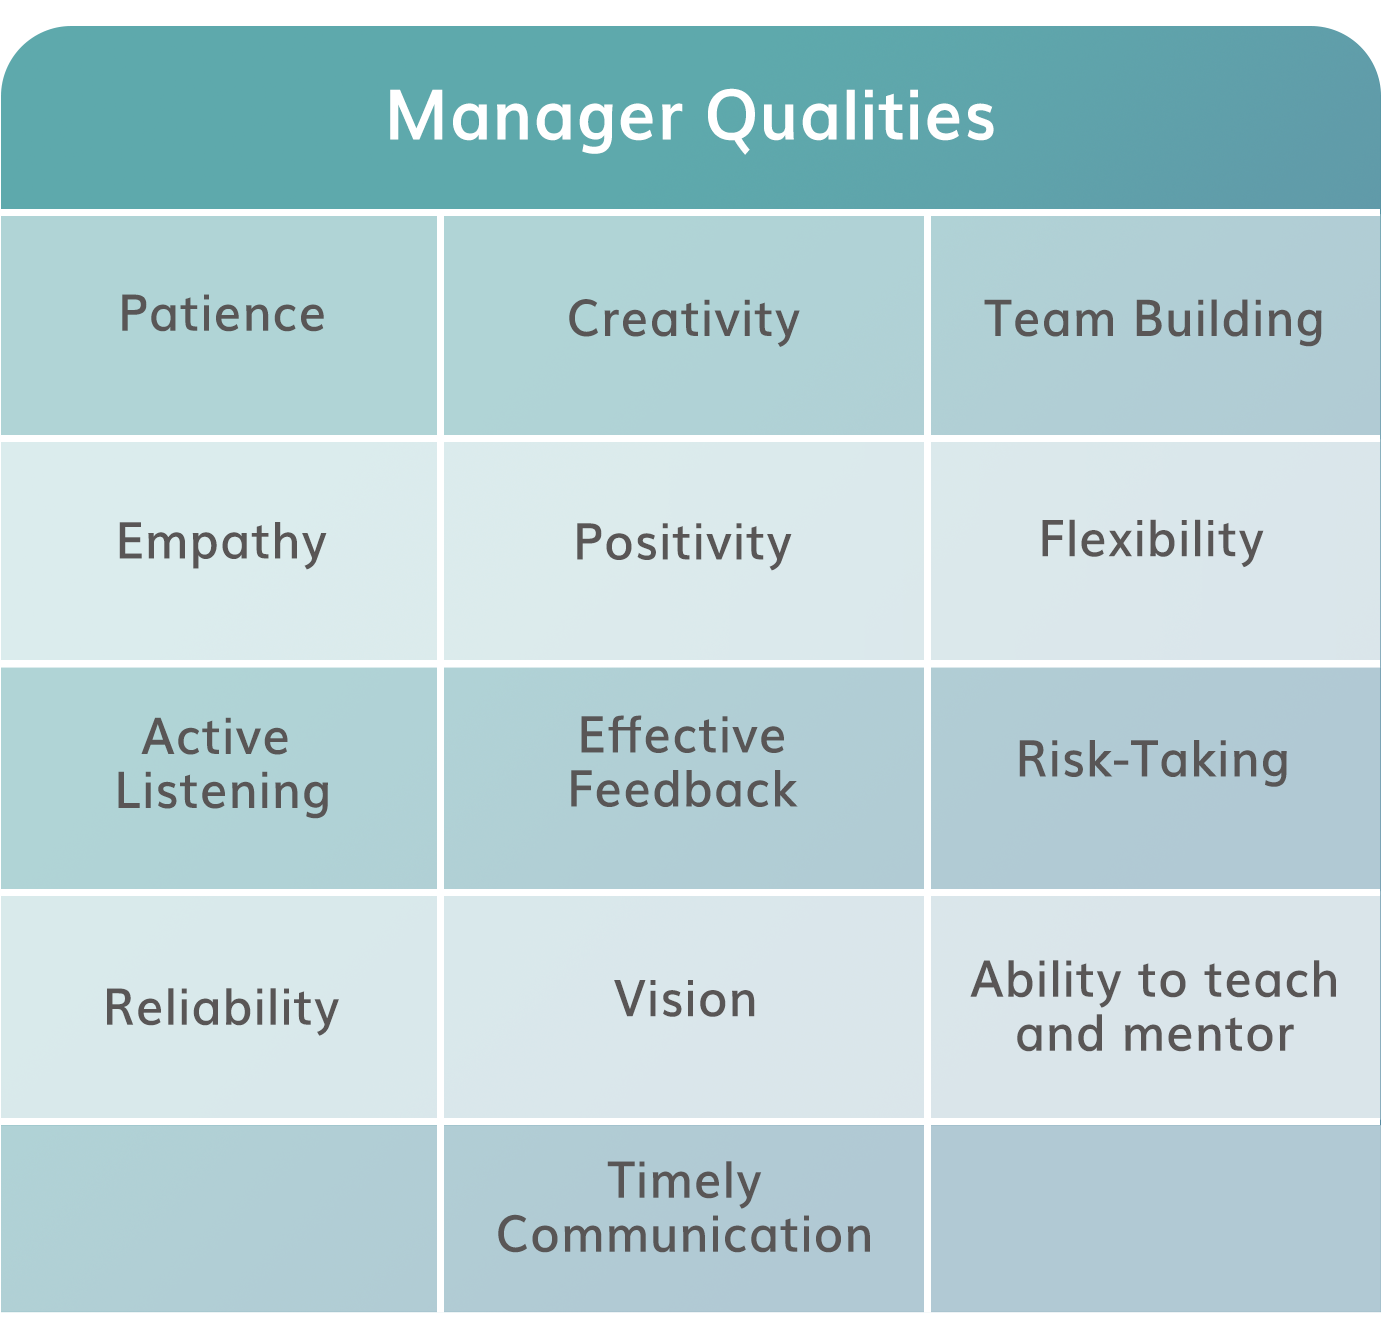 ManagerQualities